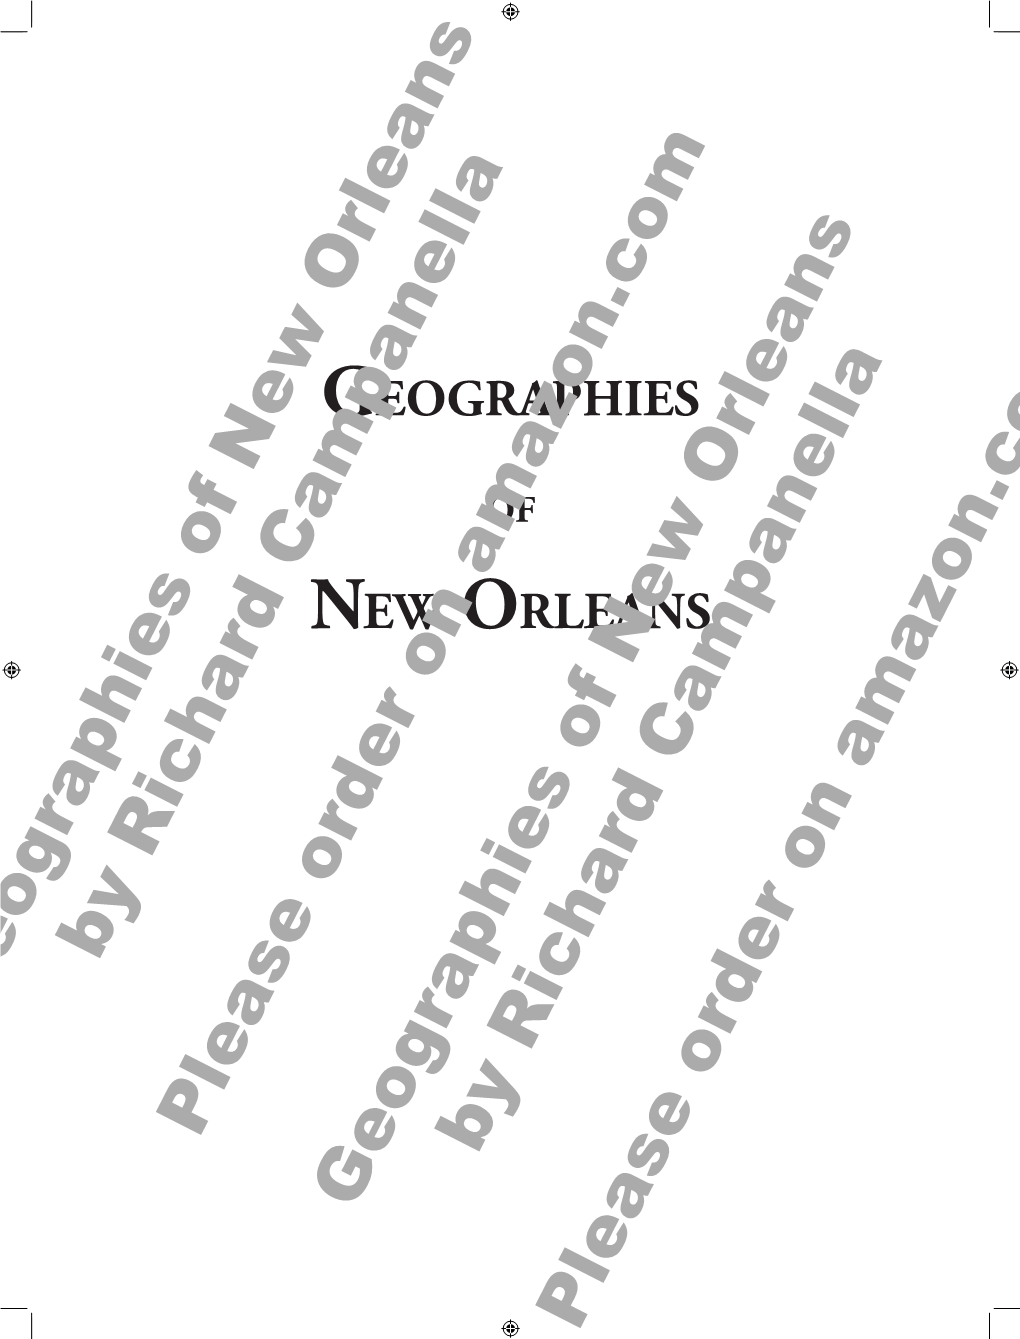 Geographies of New Orleans by Richard Campanella Please Order on Amazon.Com Geographies of New Orleans by Richard Campanella